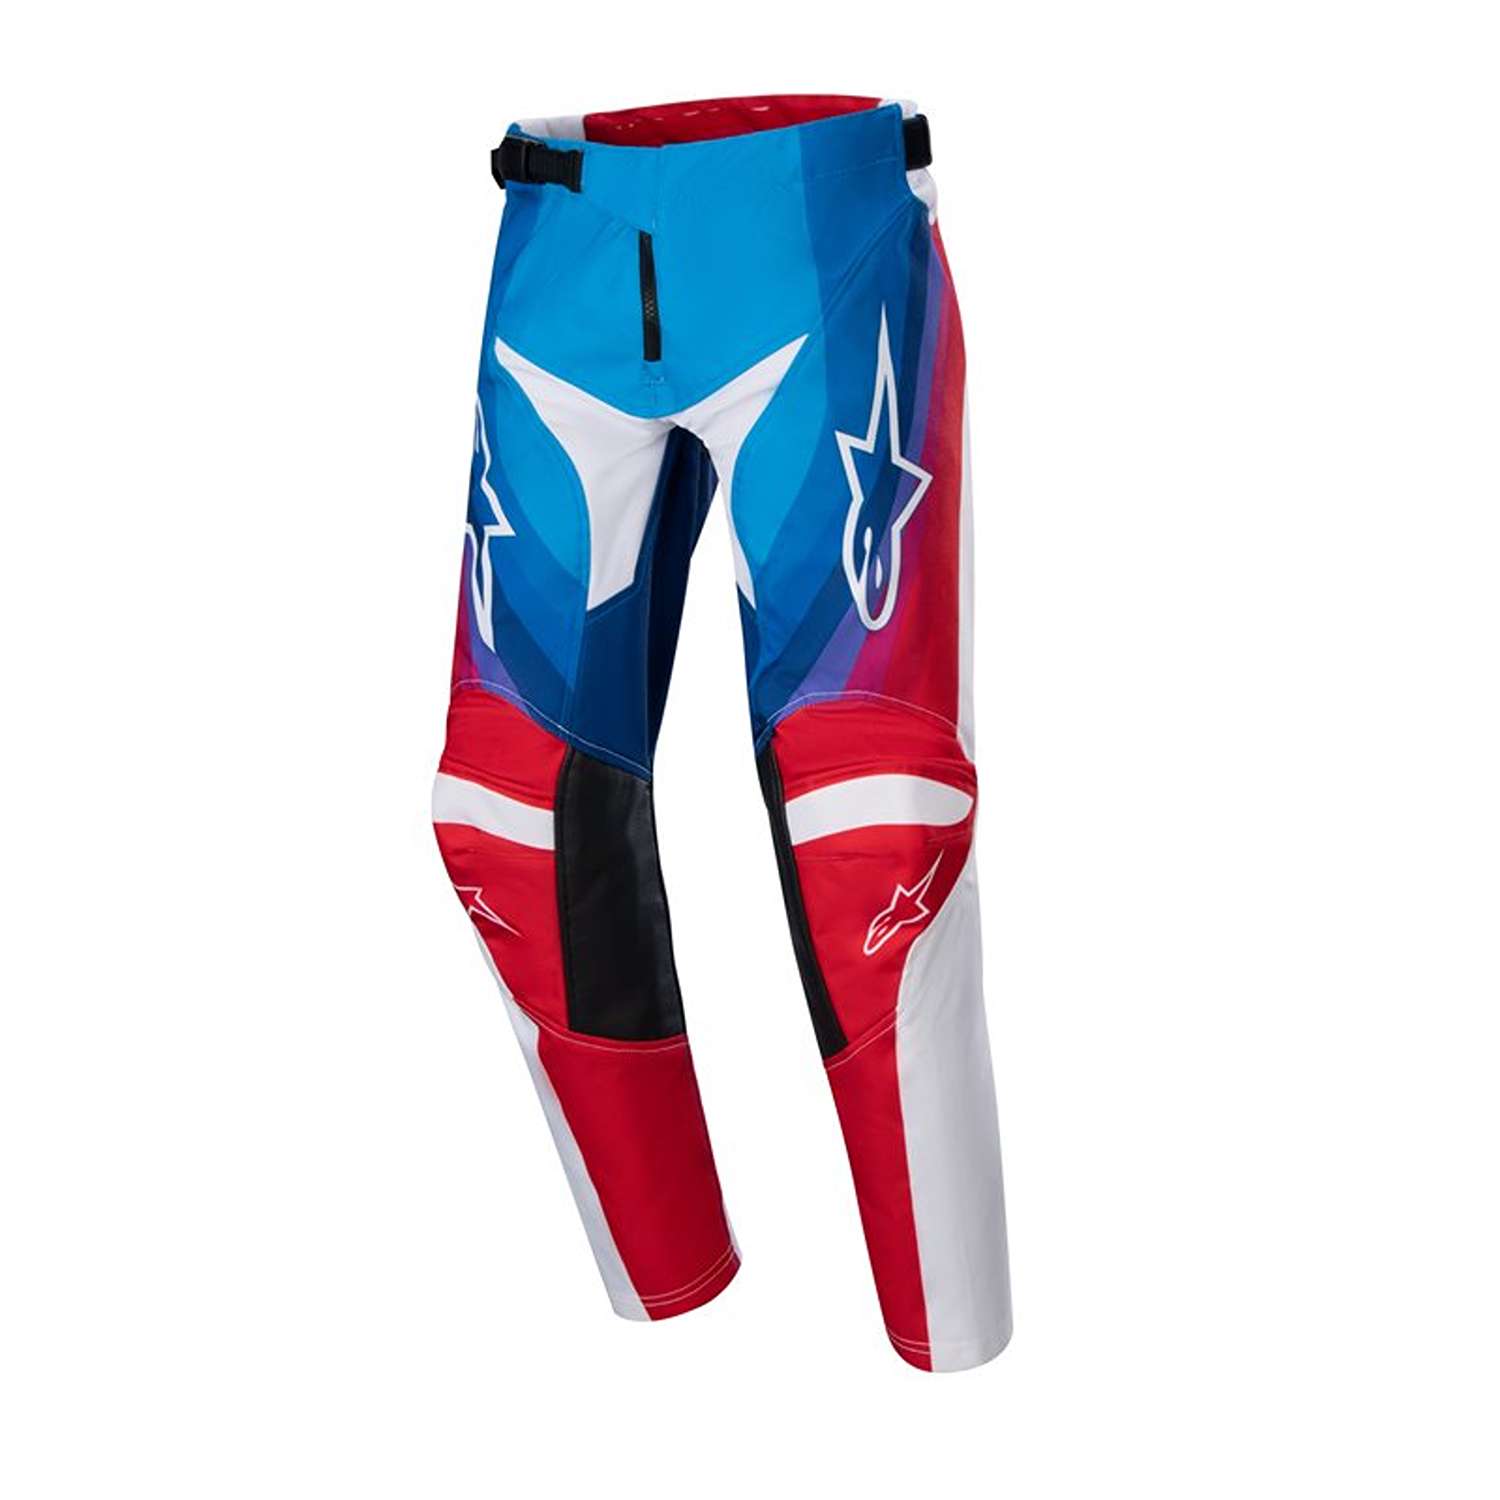 Image of EU Alpinestars Youth Racer Pneuma Pants Blue Mars Red White Taille 22